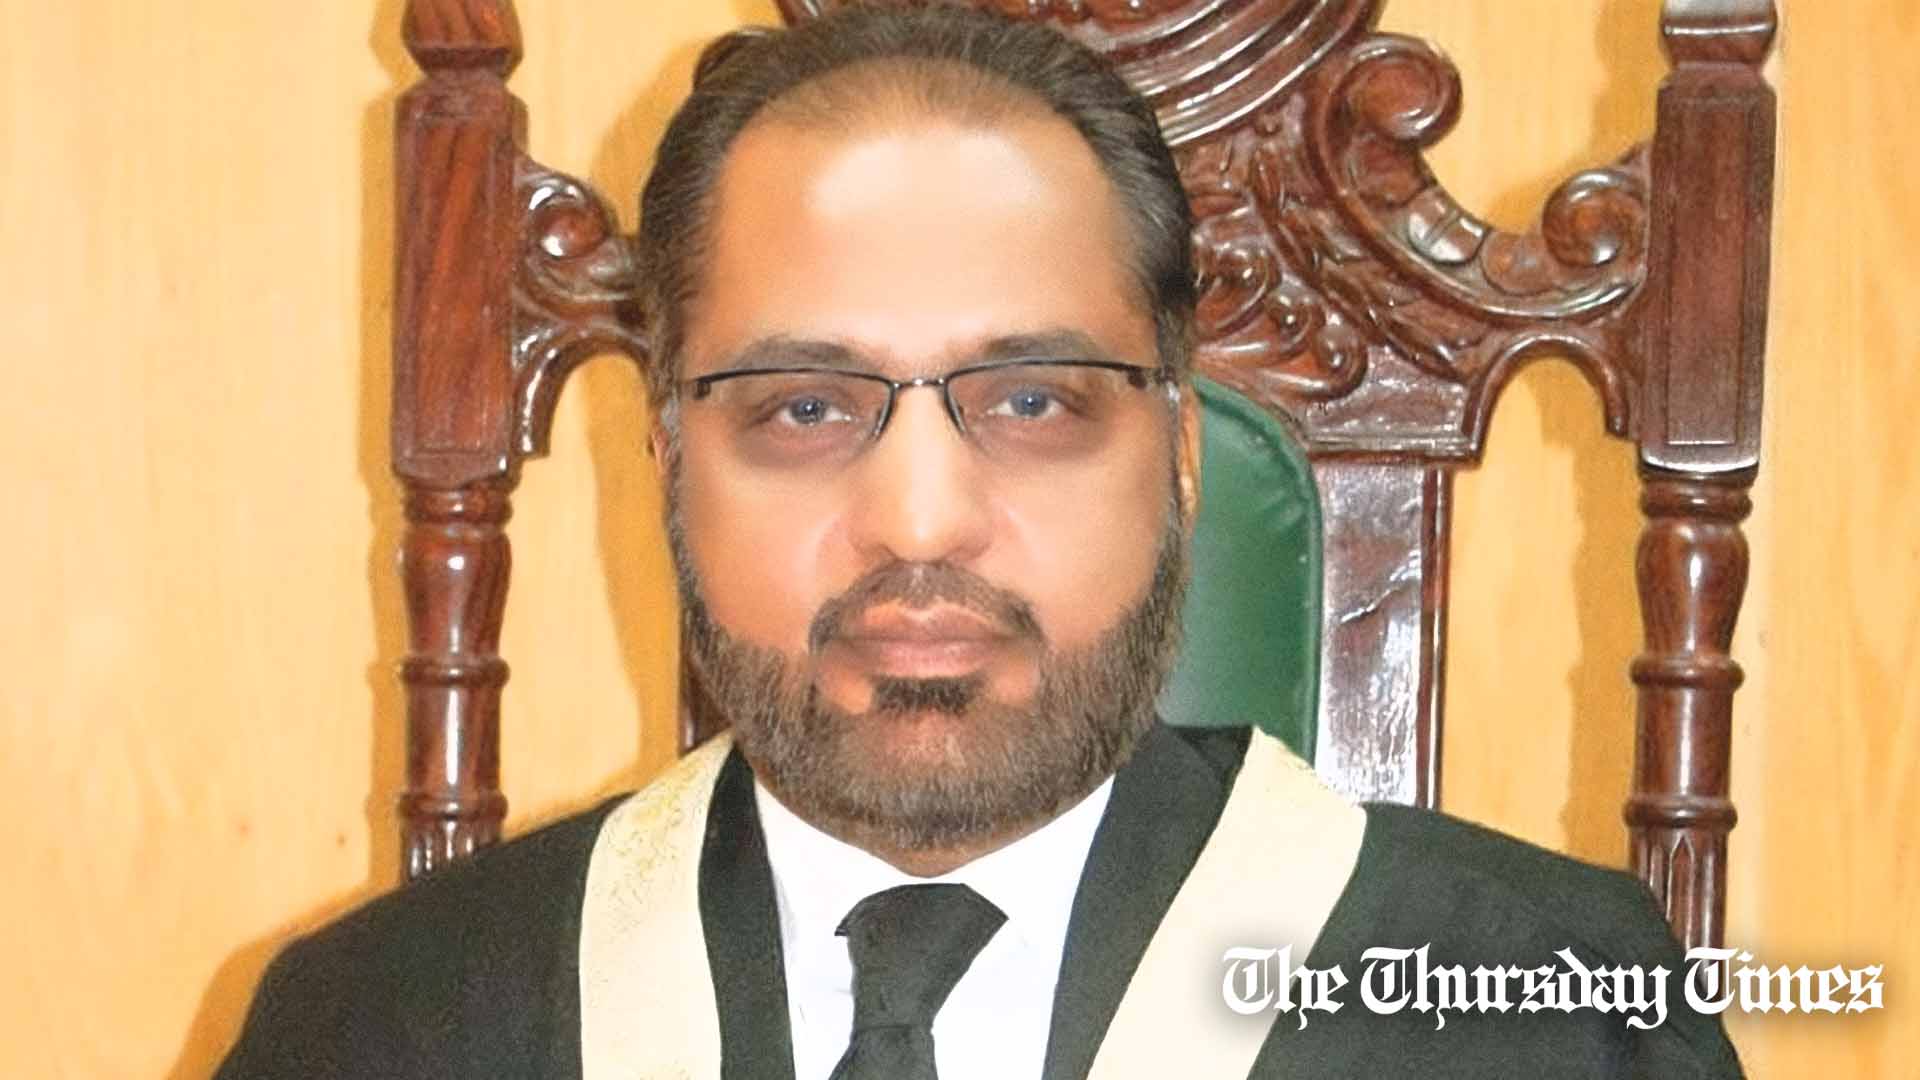 A file photo is shown of former Senior Justice of the Islamabad High Court Shaukat Aziz Siddiqui. — FILE/THE THURSDAY TIMES